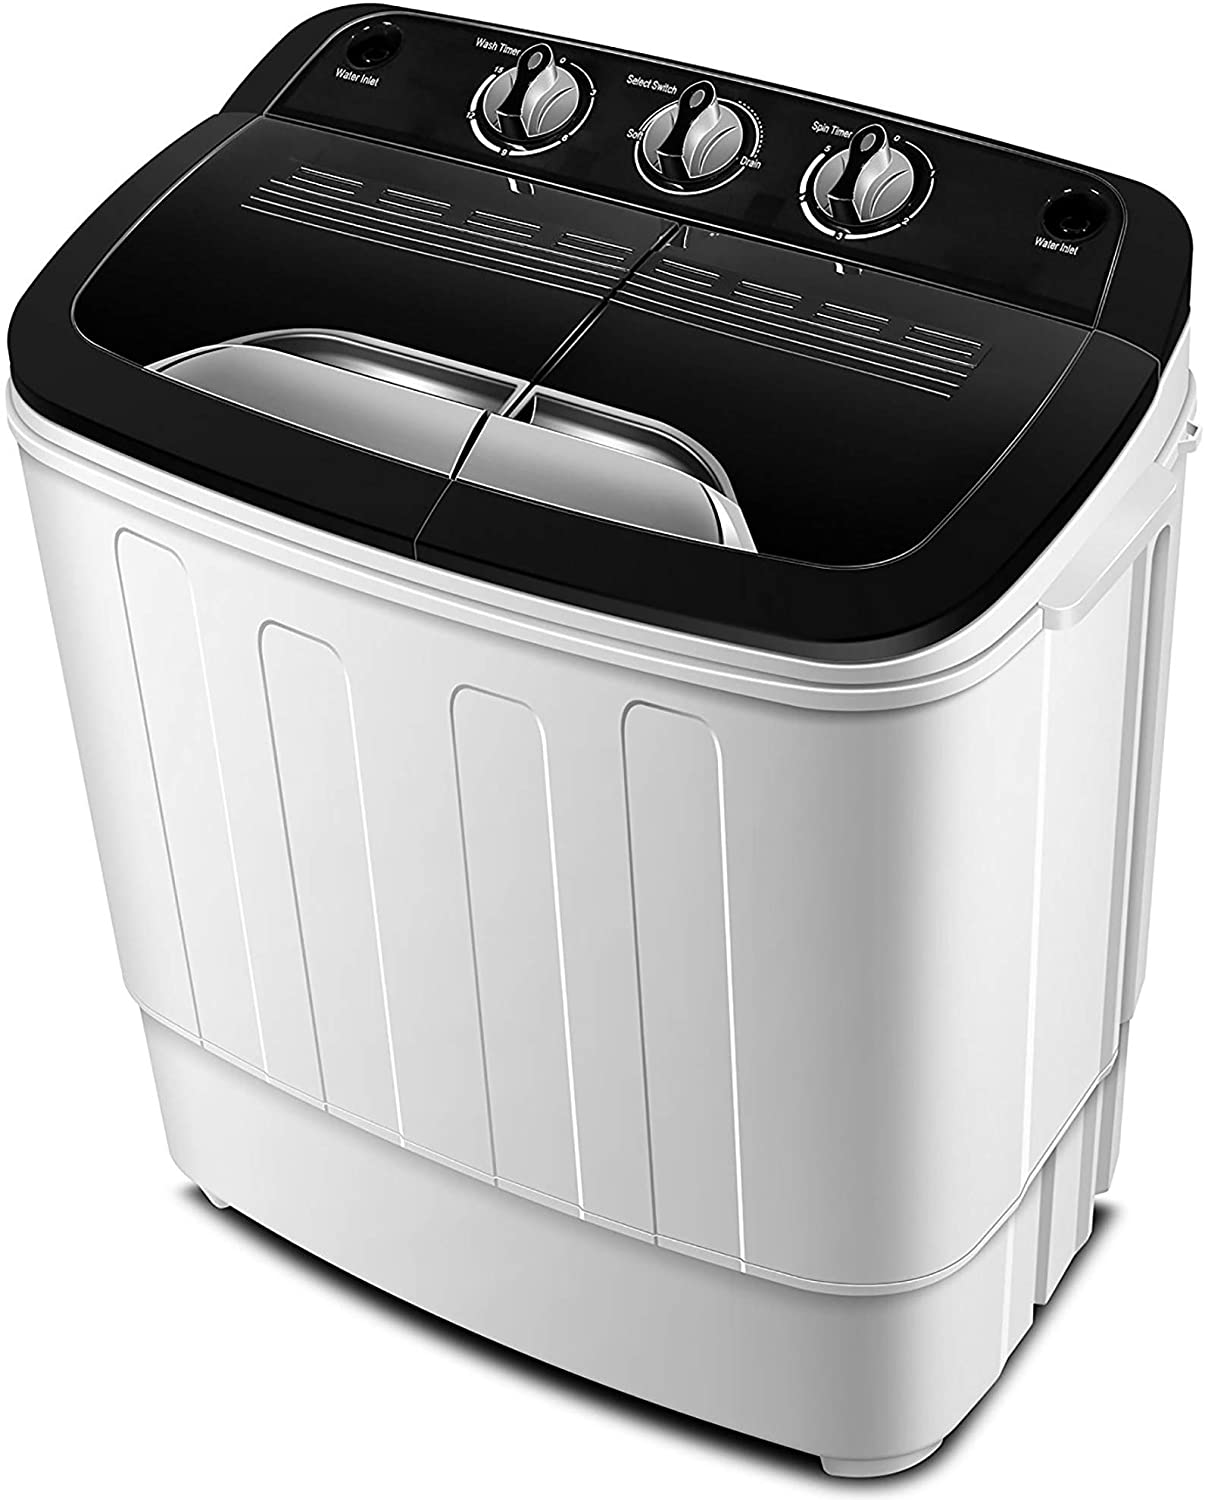 8 Best Portable Washer Dryer Combos (Under 250, 350, 500) Keep It